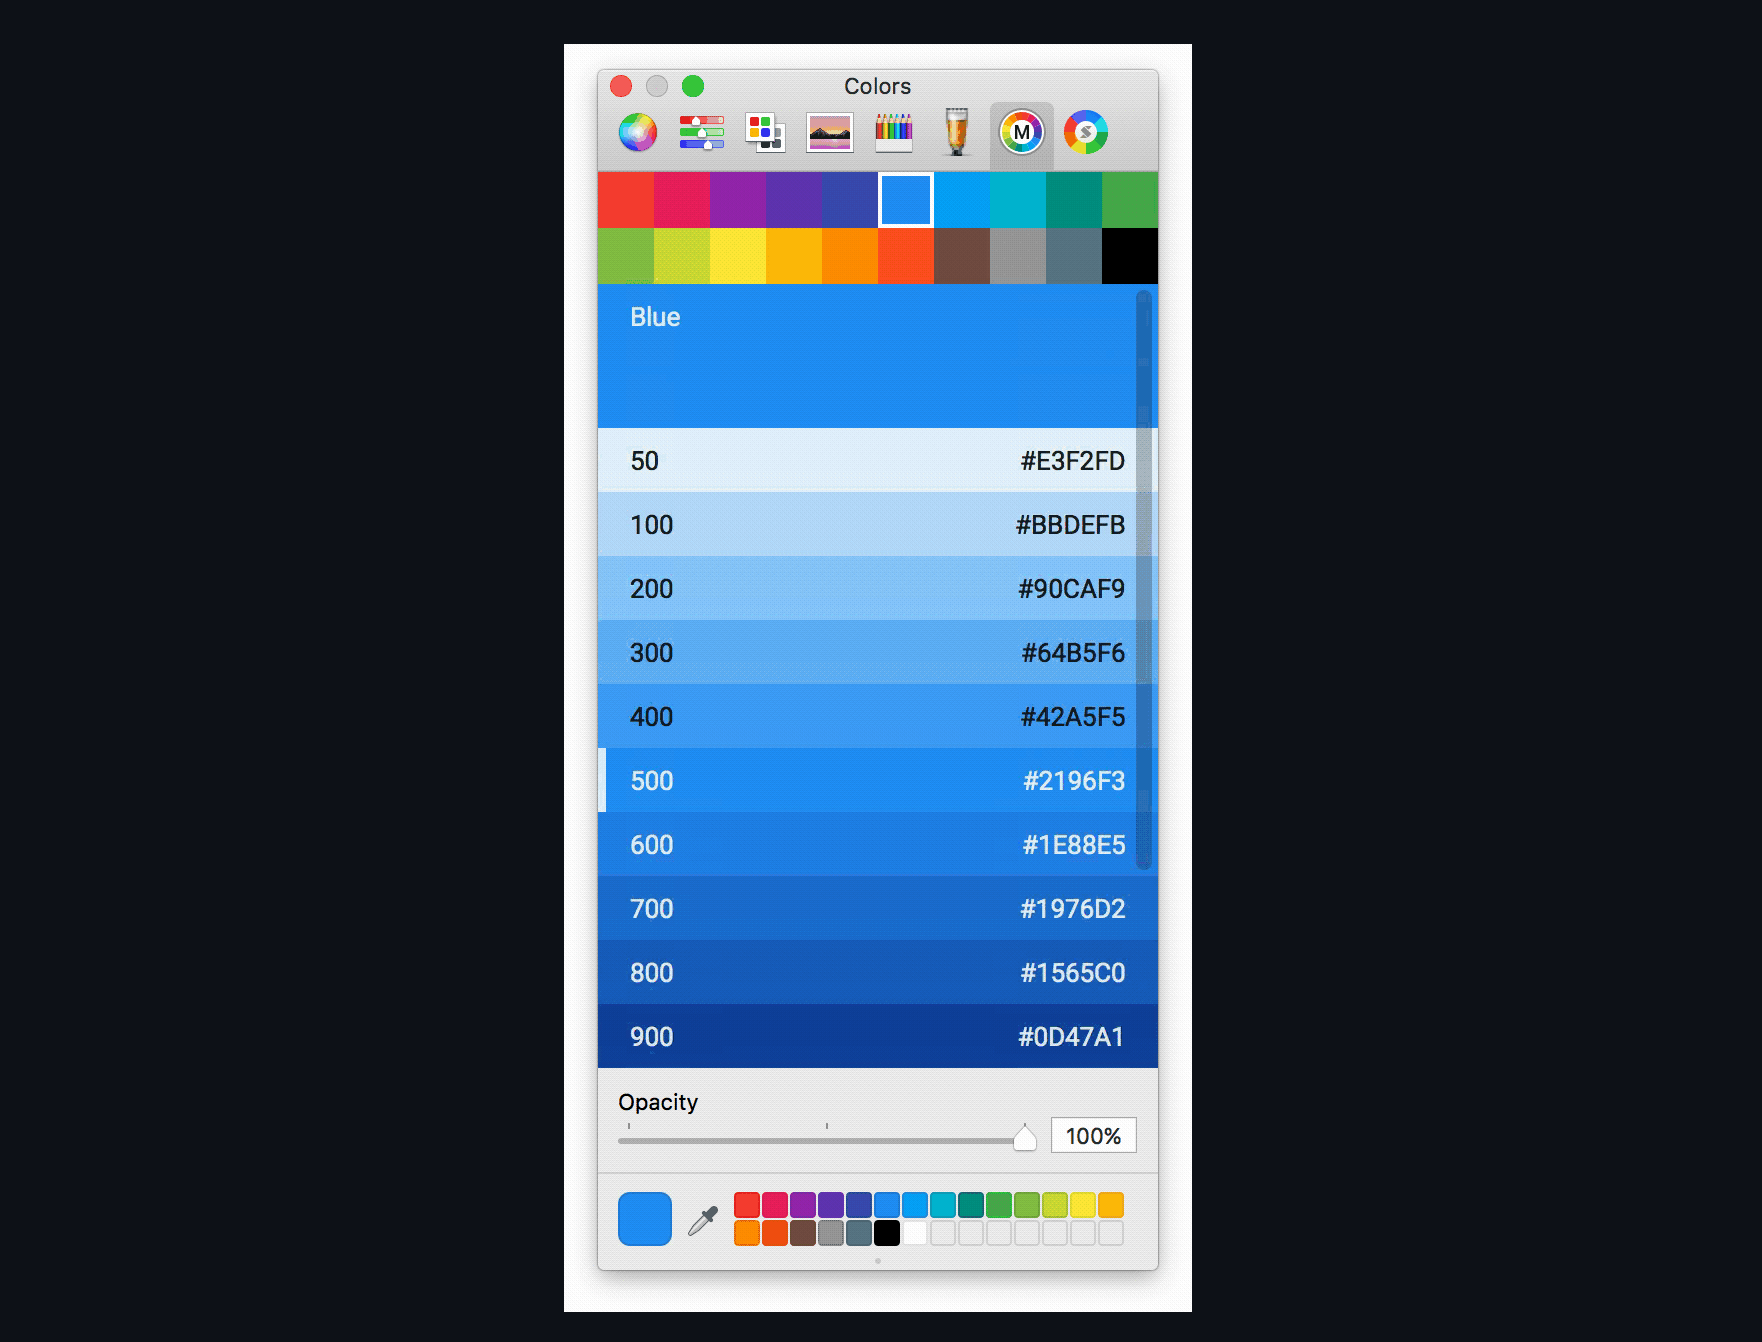 ColorSlurp · The best color picker in the universe!